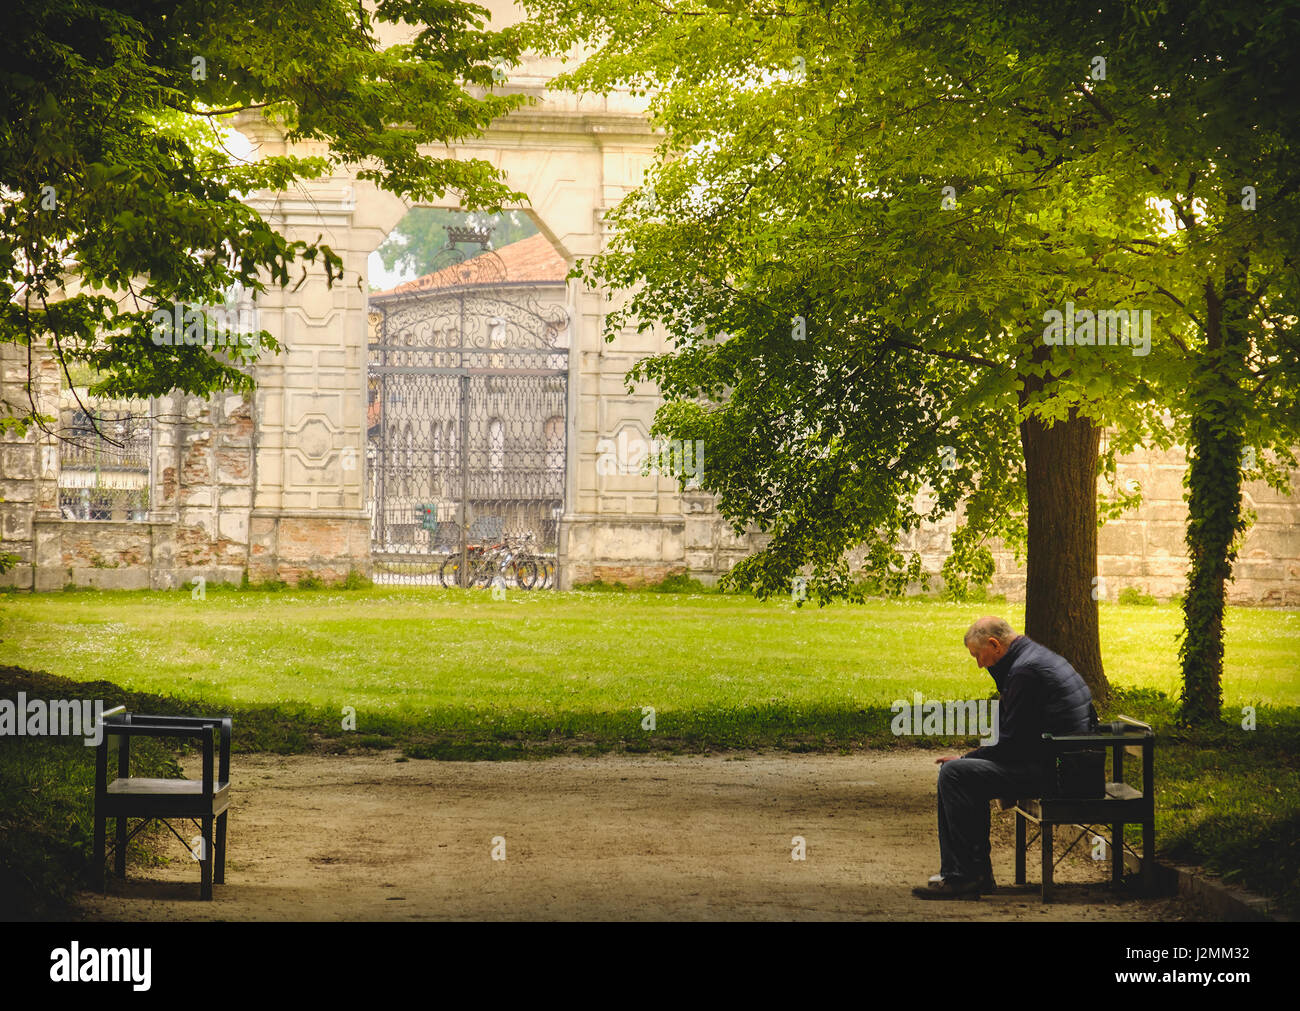 Stra, Italy, 25 Apr 2017 - aged man sitting in loneliness on a park banch in the shade of trees Stock Photo